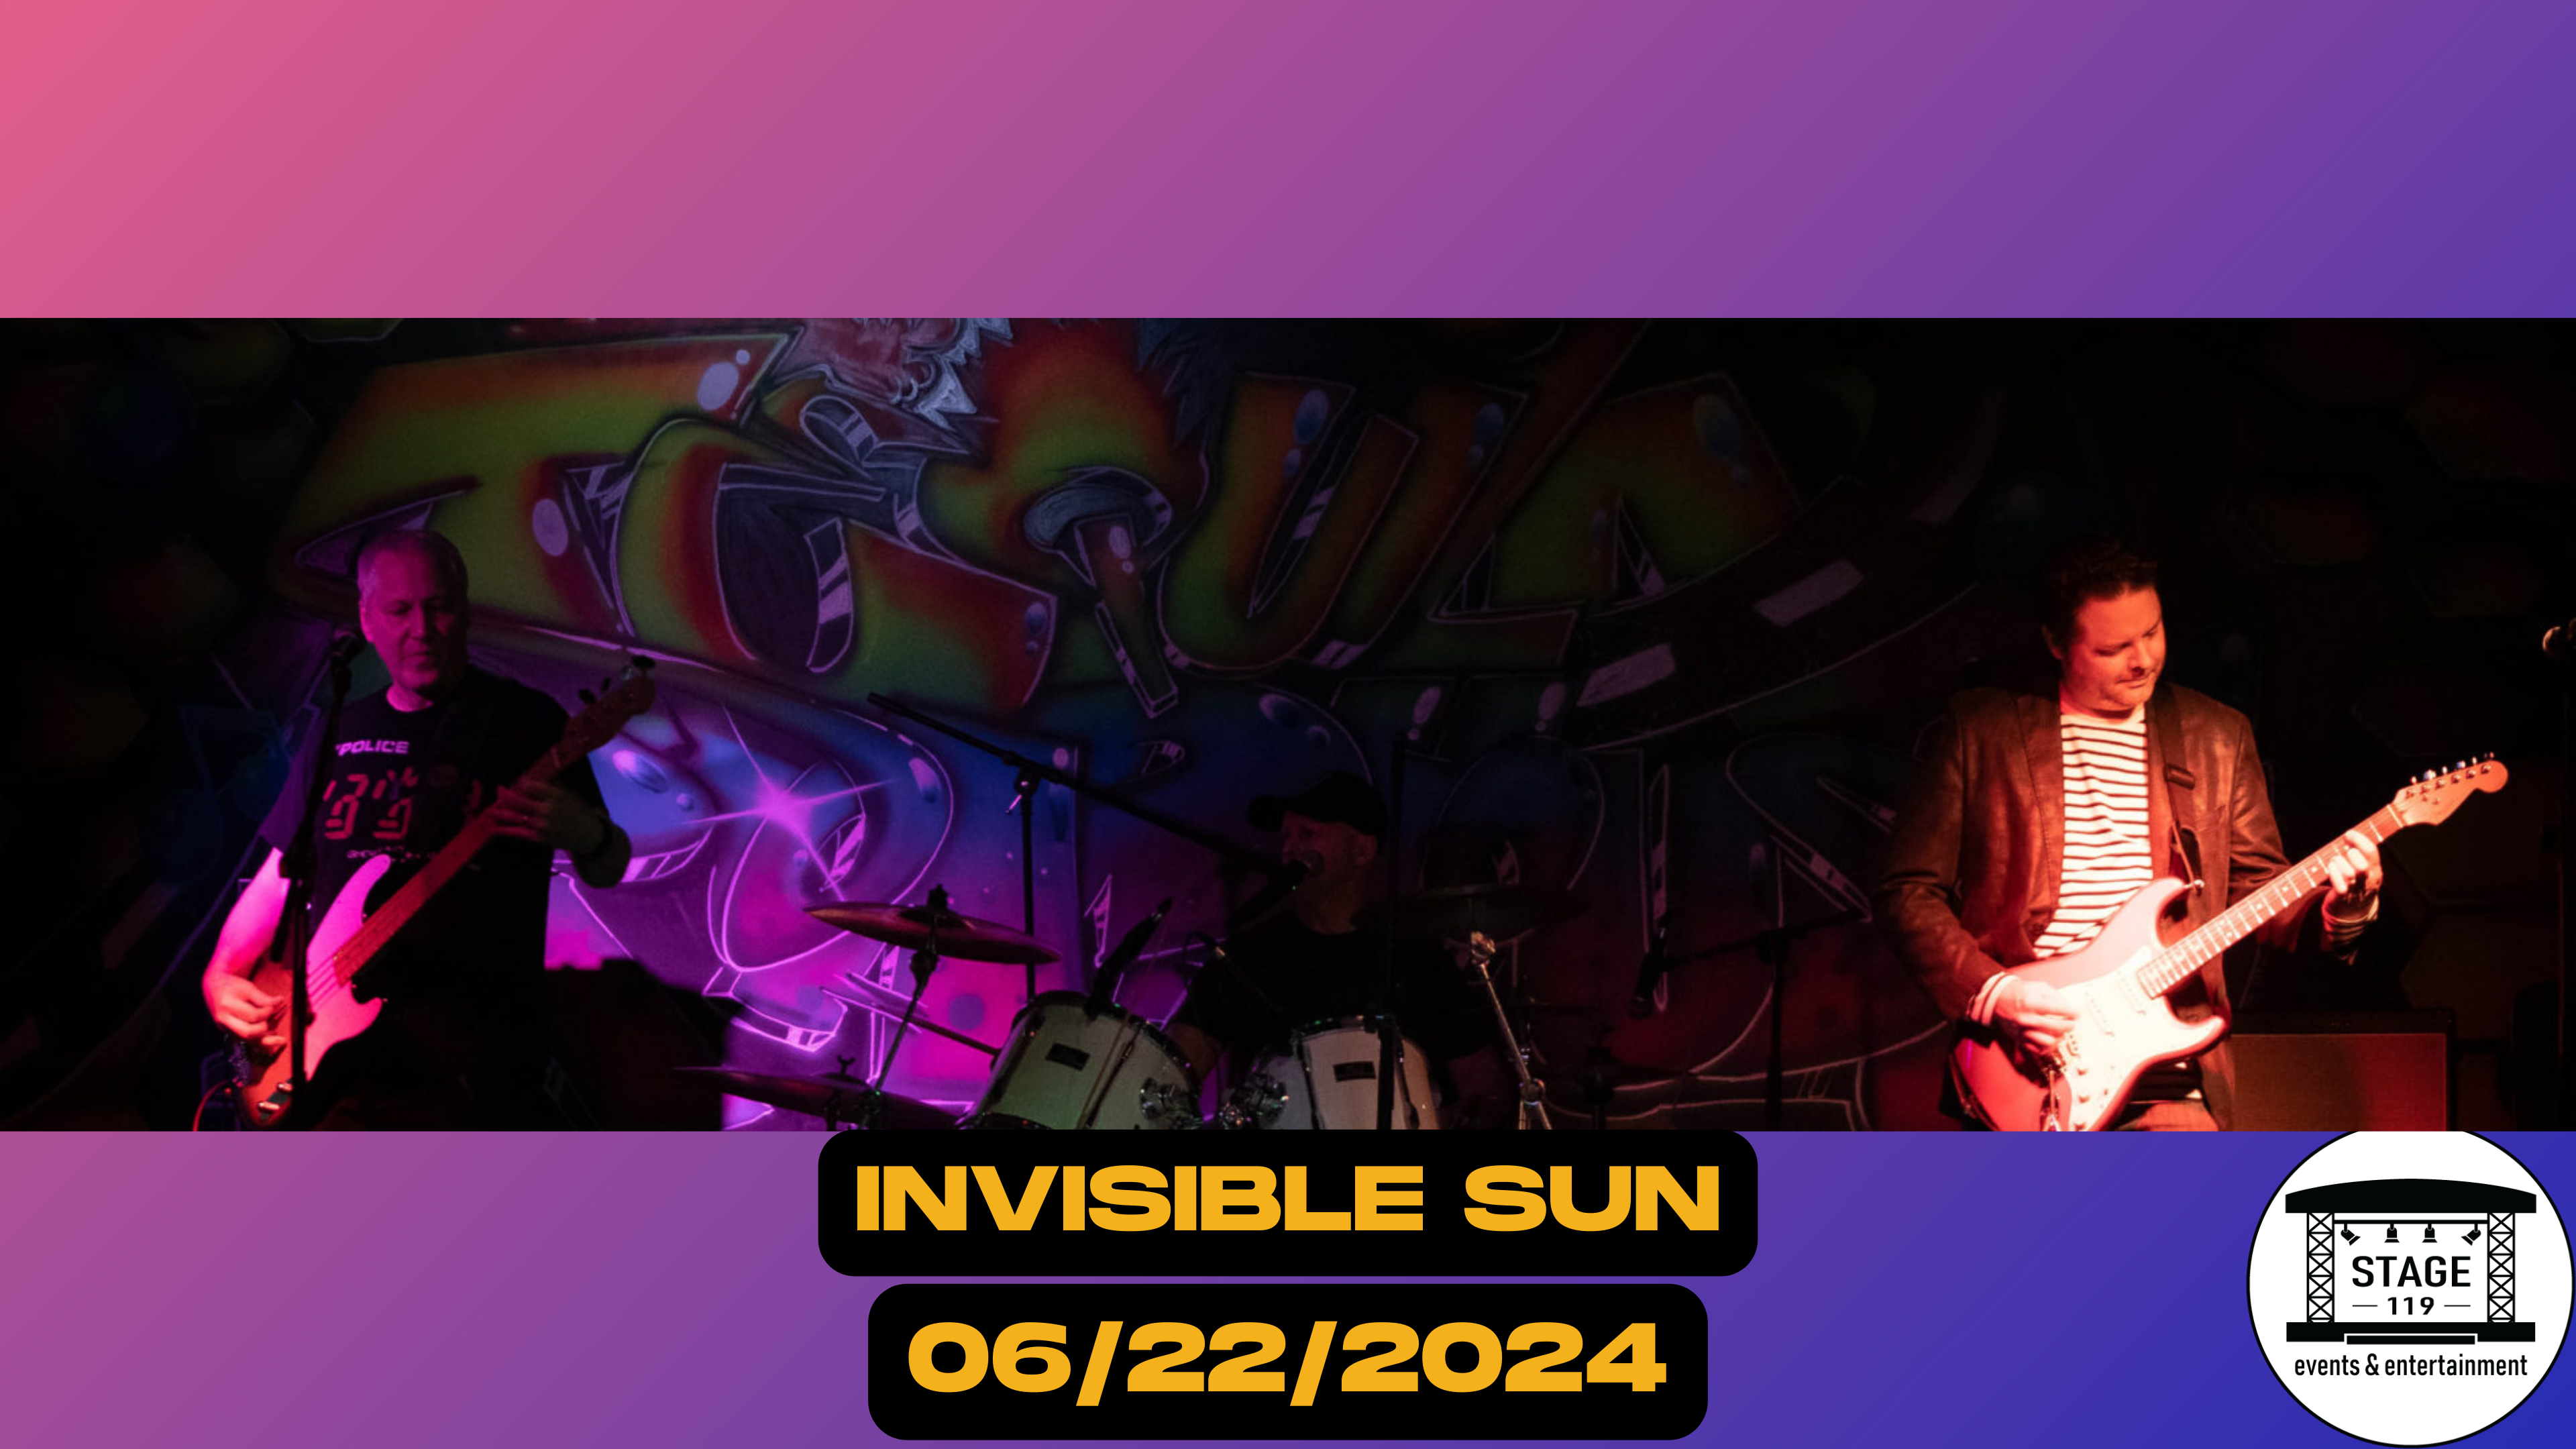 INVISIBLE SUN at Stage 119